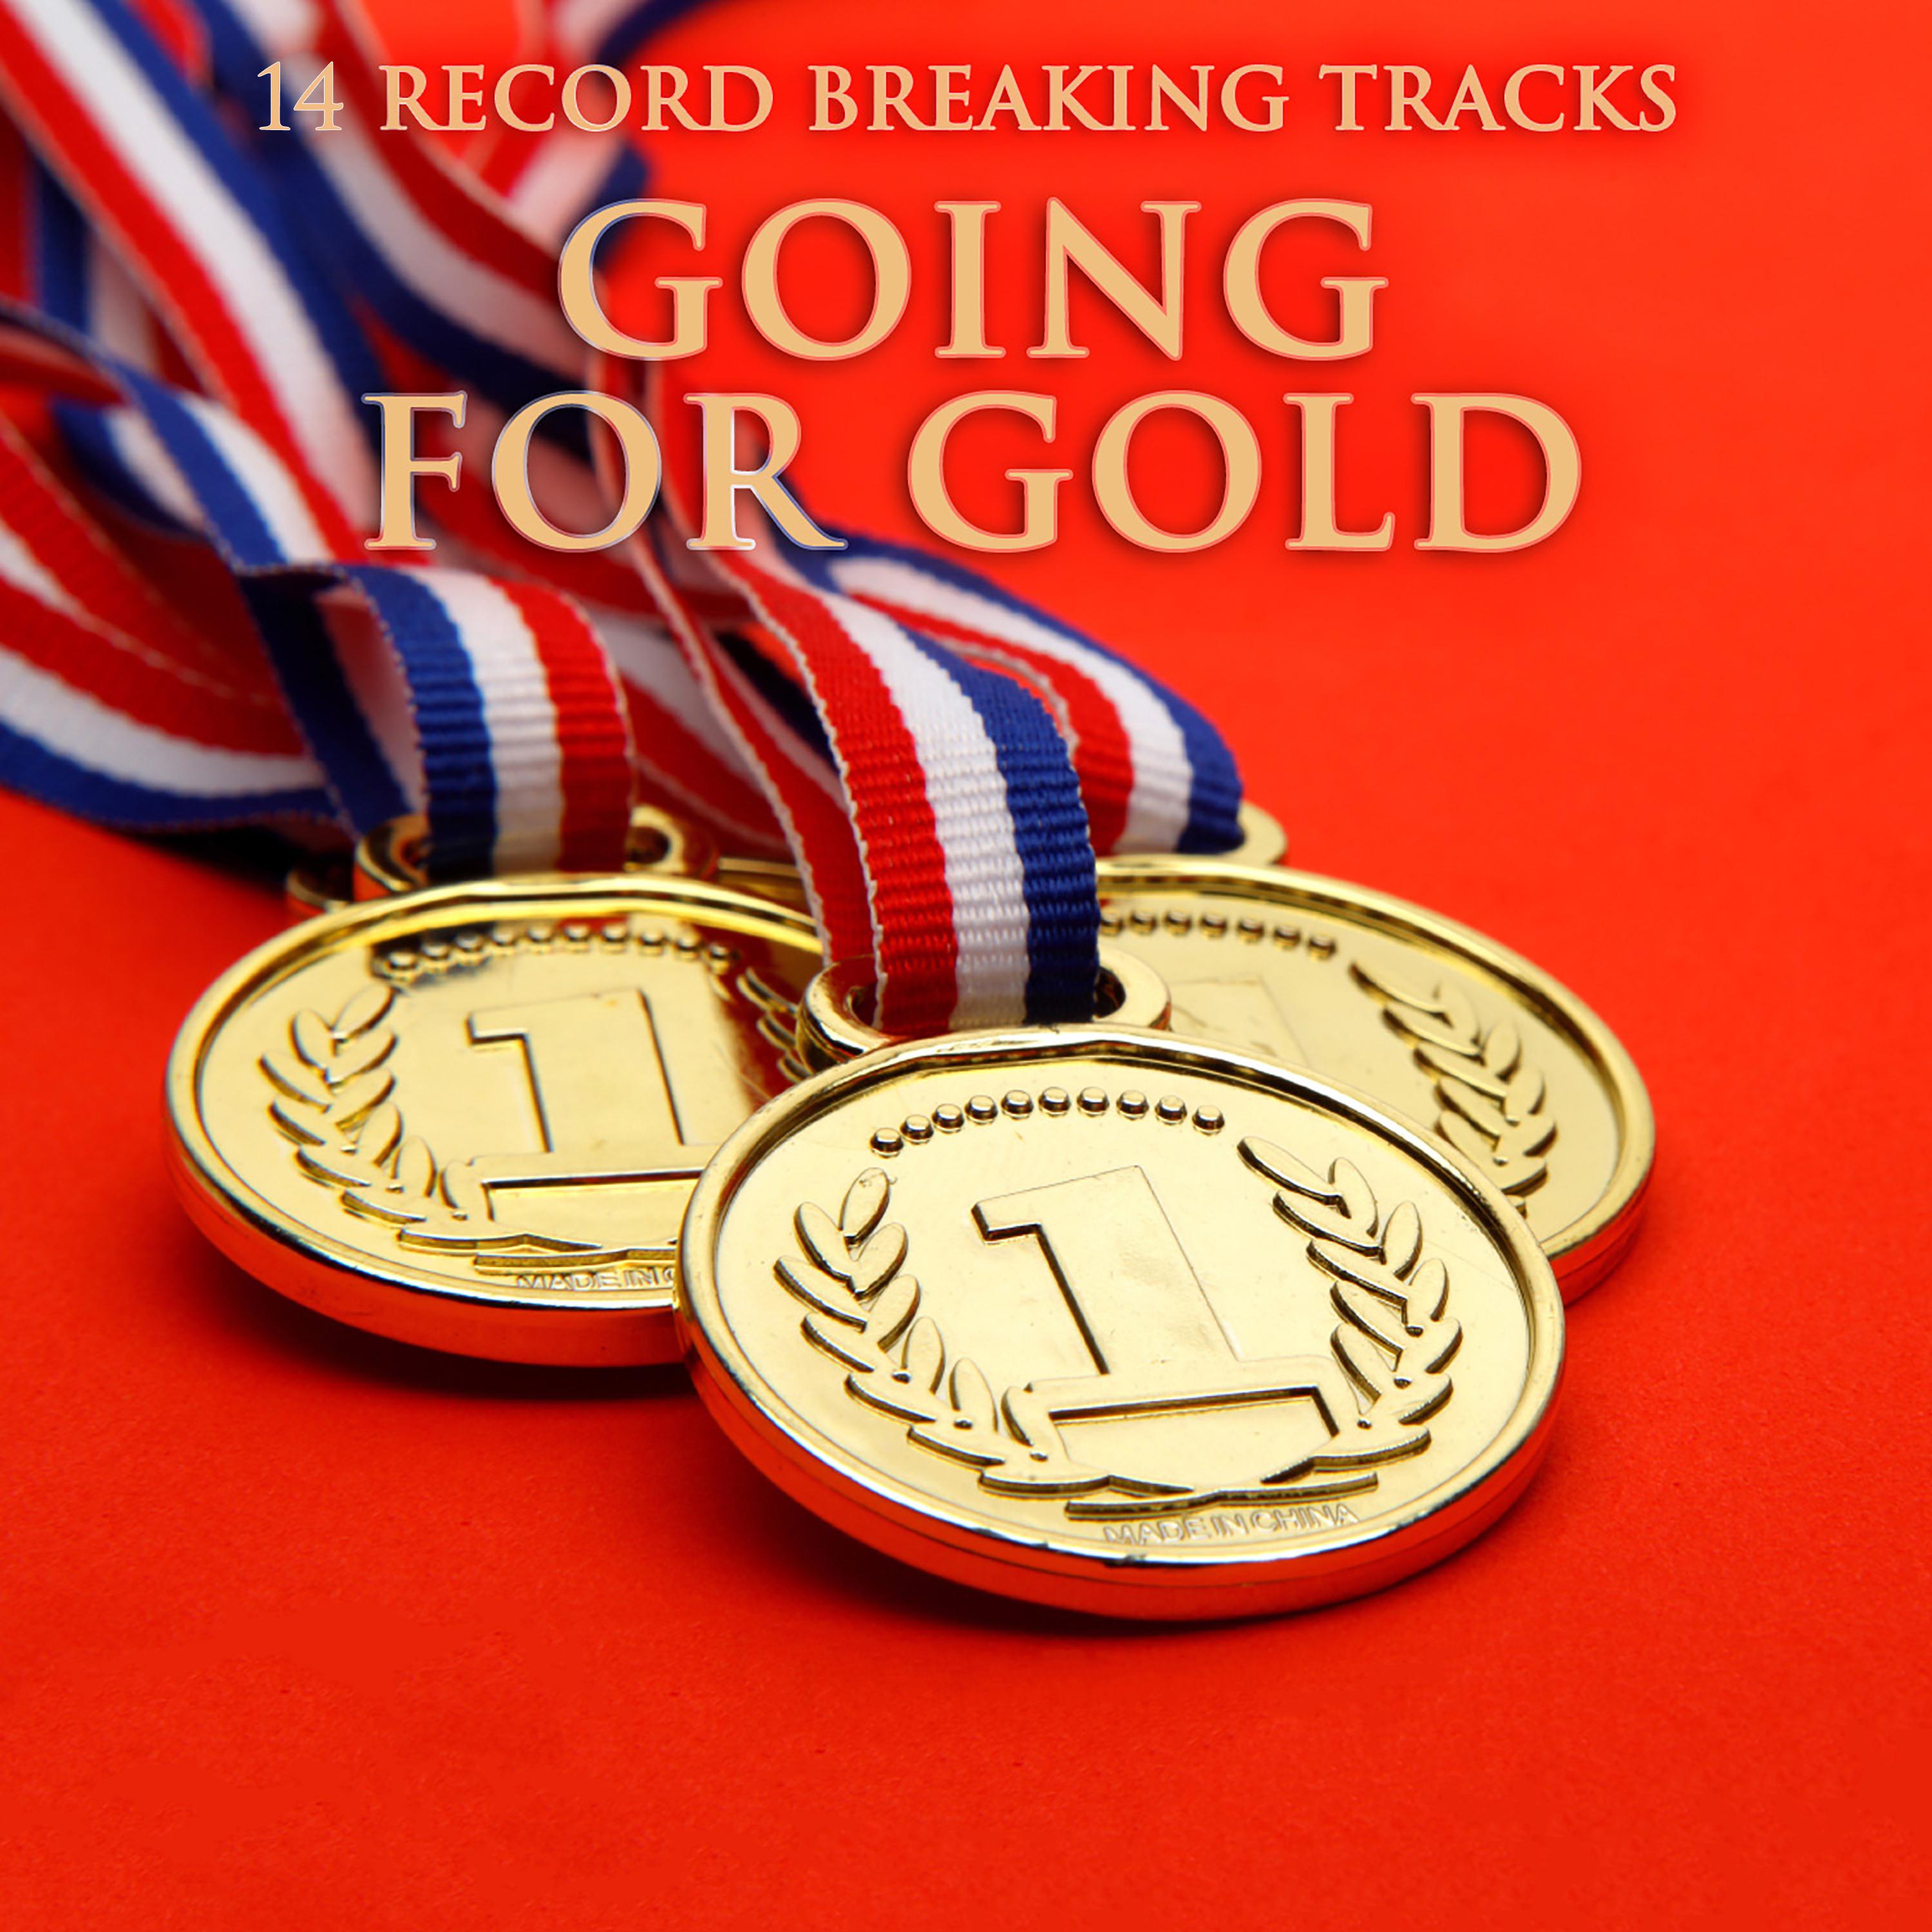 Going For Gold (14 Record Breaking Tracks)